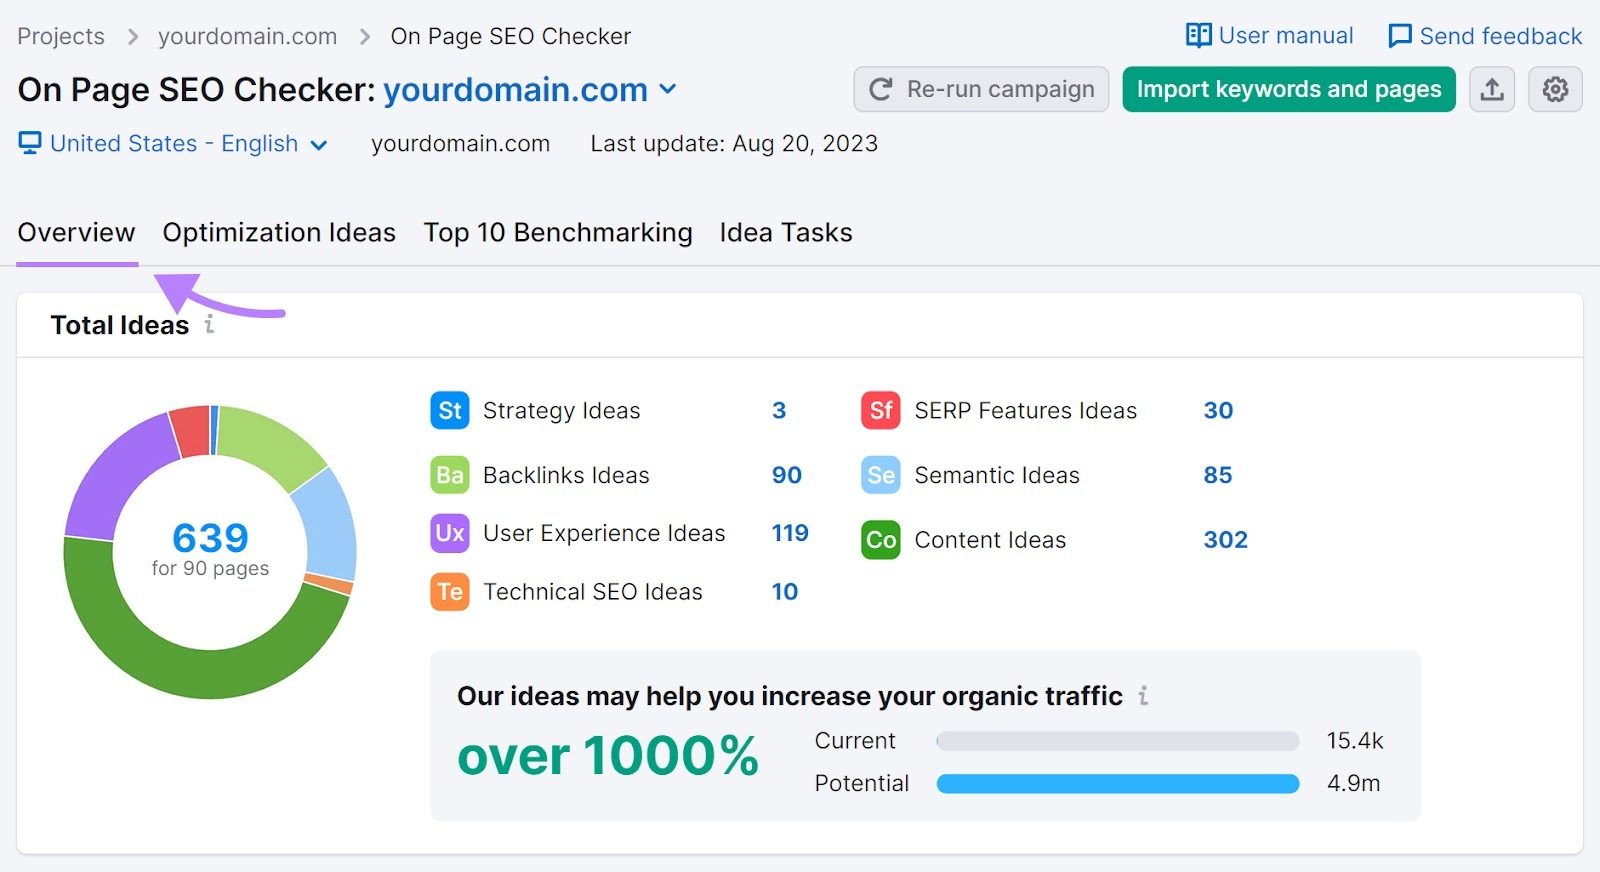 On Page SEO Checker overview dashboard